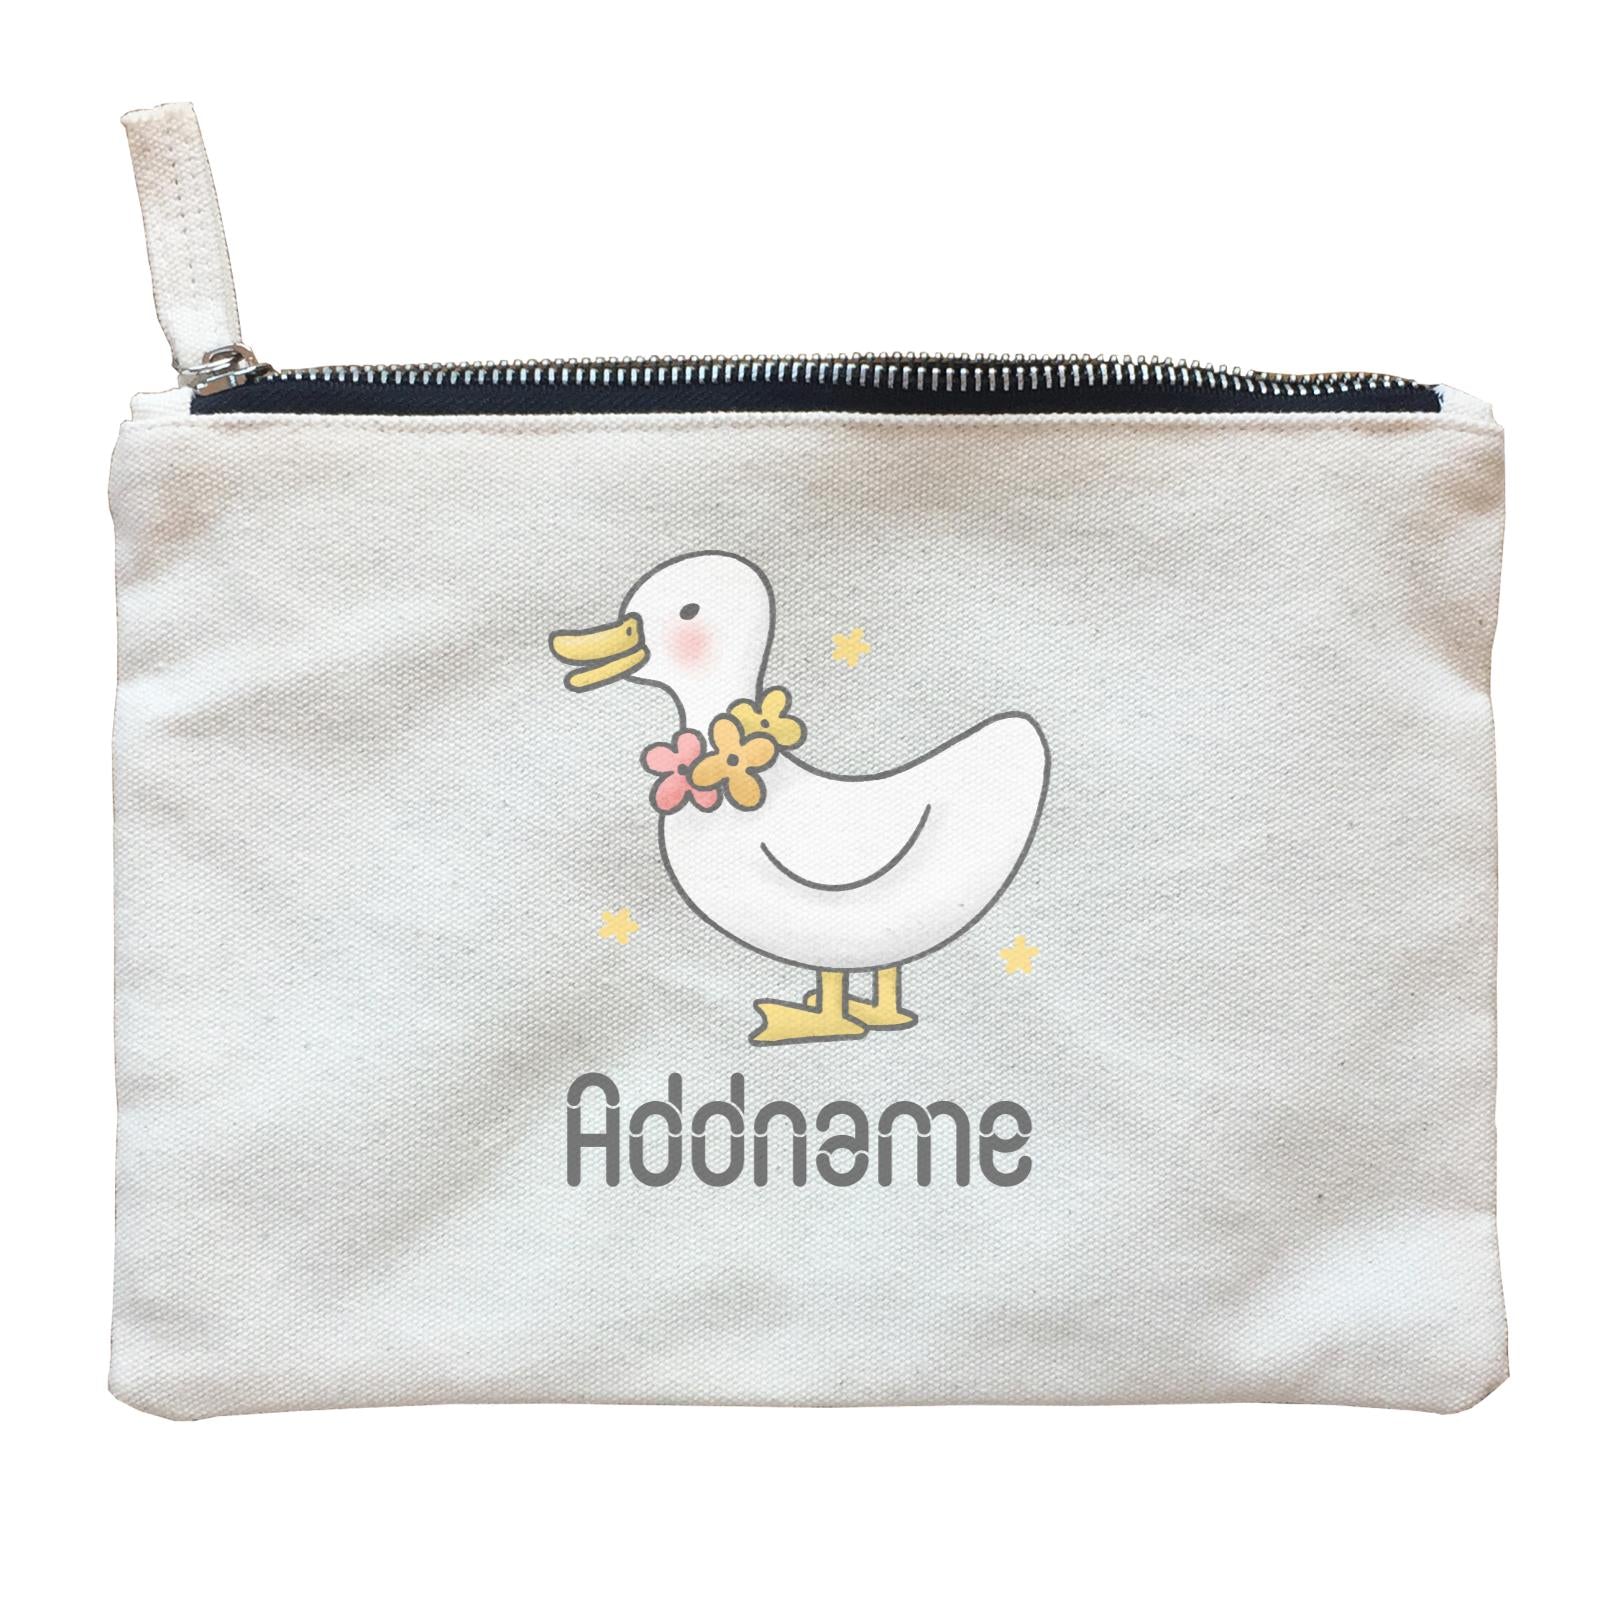 Cute Hand Drawn Style Duck Addname Zipper Pouch